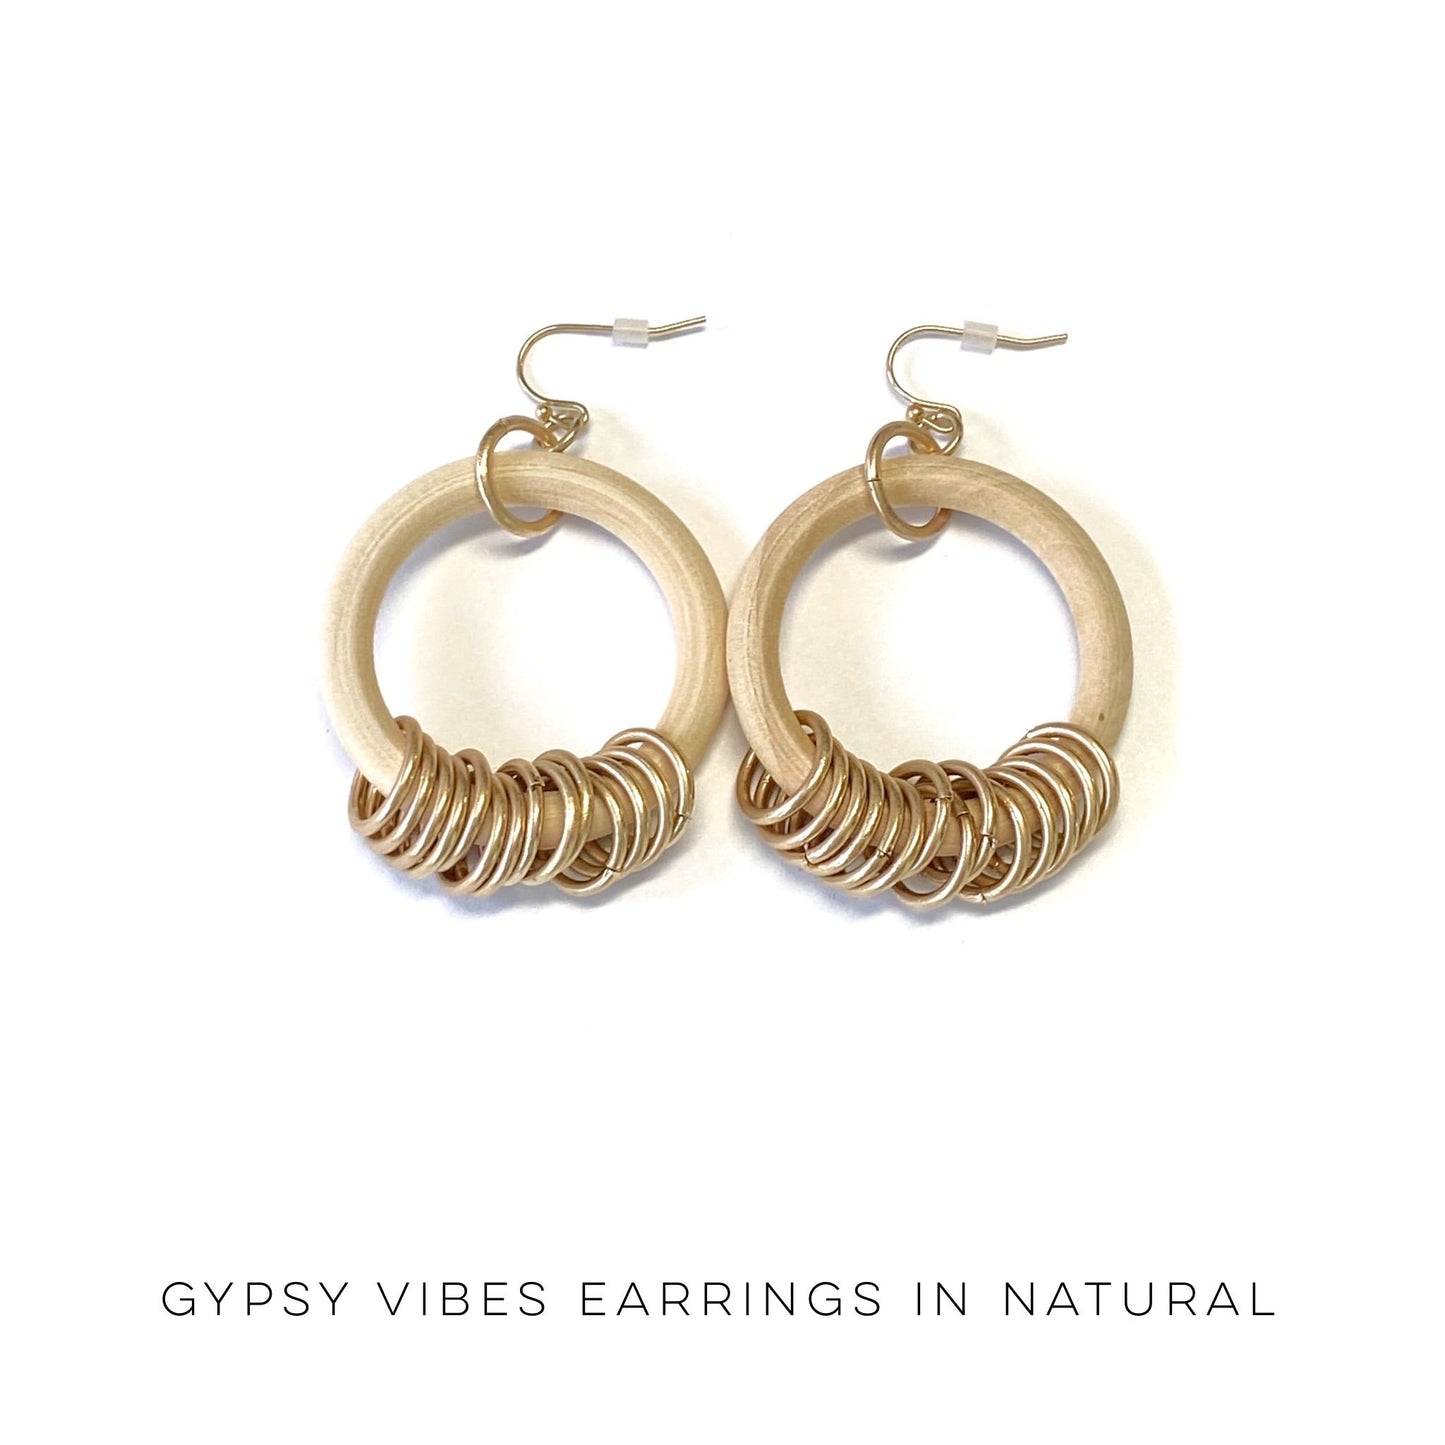 Gypsy Vibes Earrings in Natural